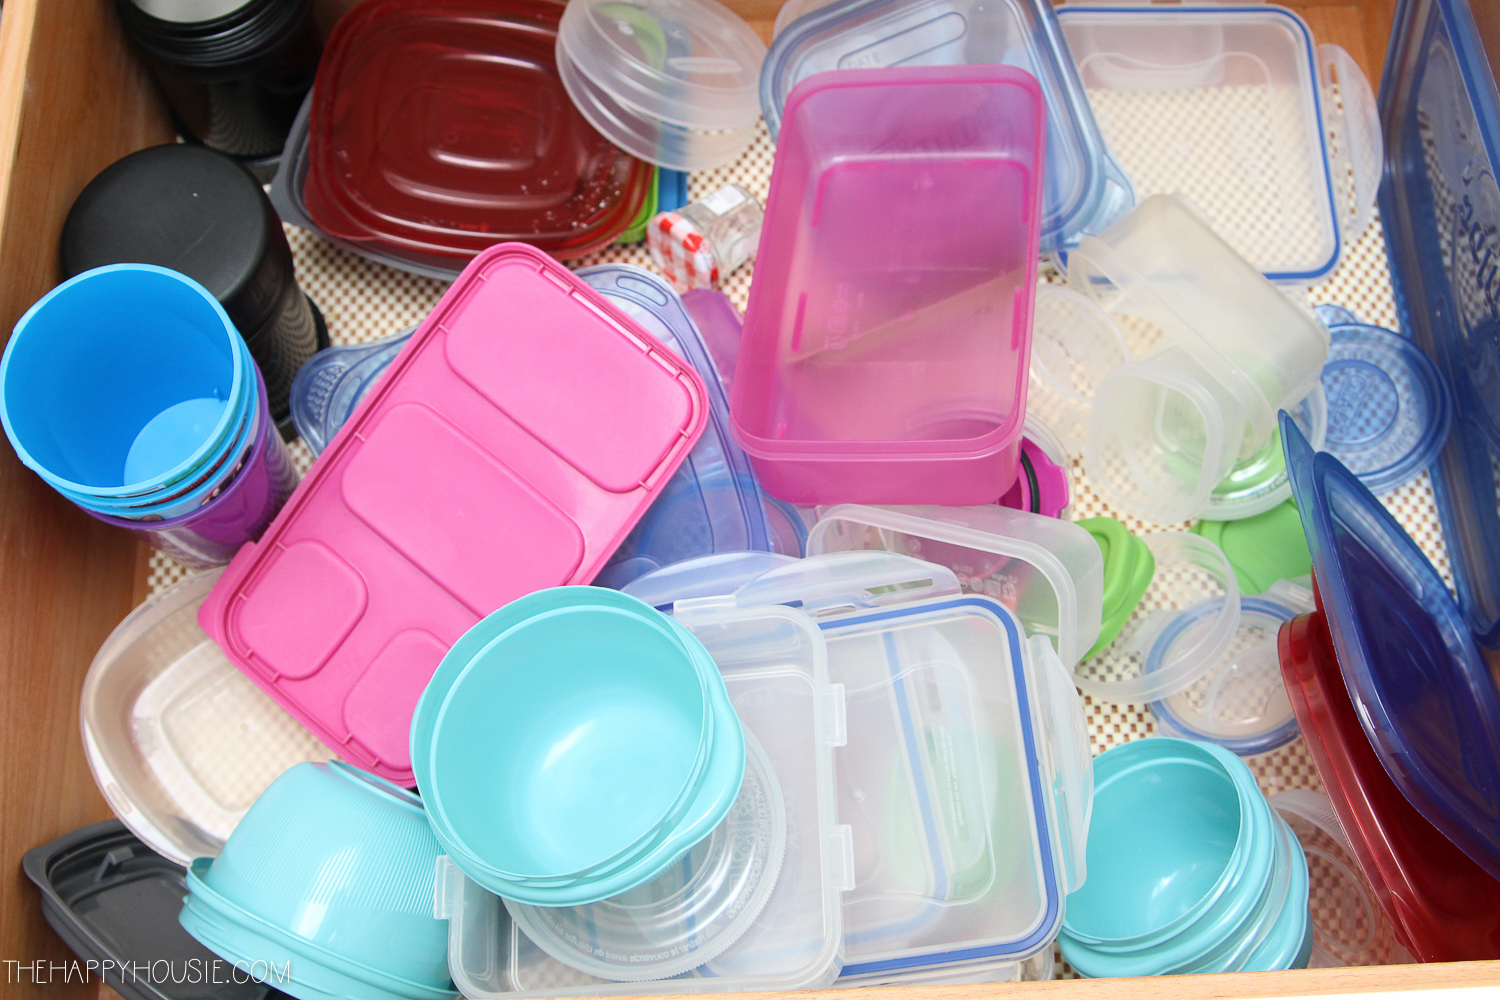 Taking all of the plastic containers out of the cupboard.